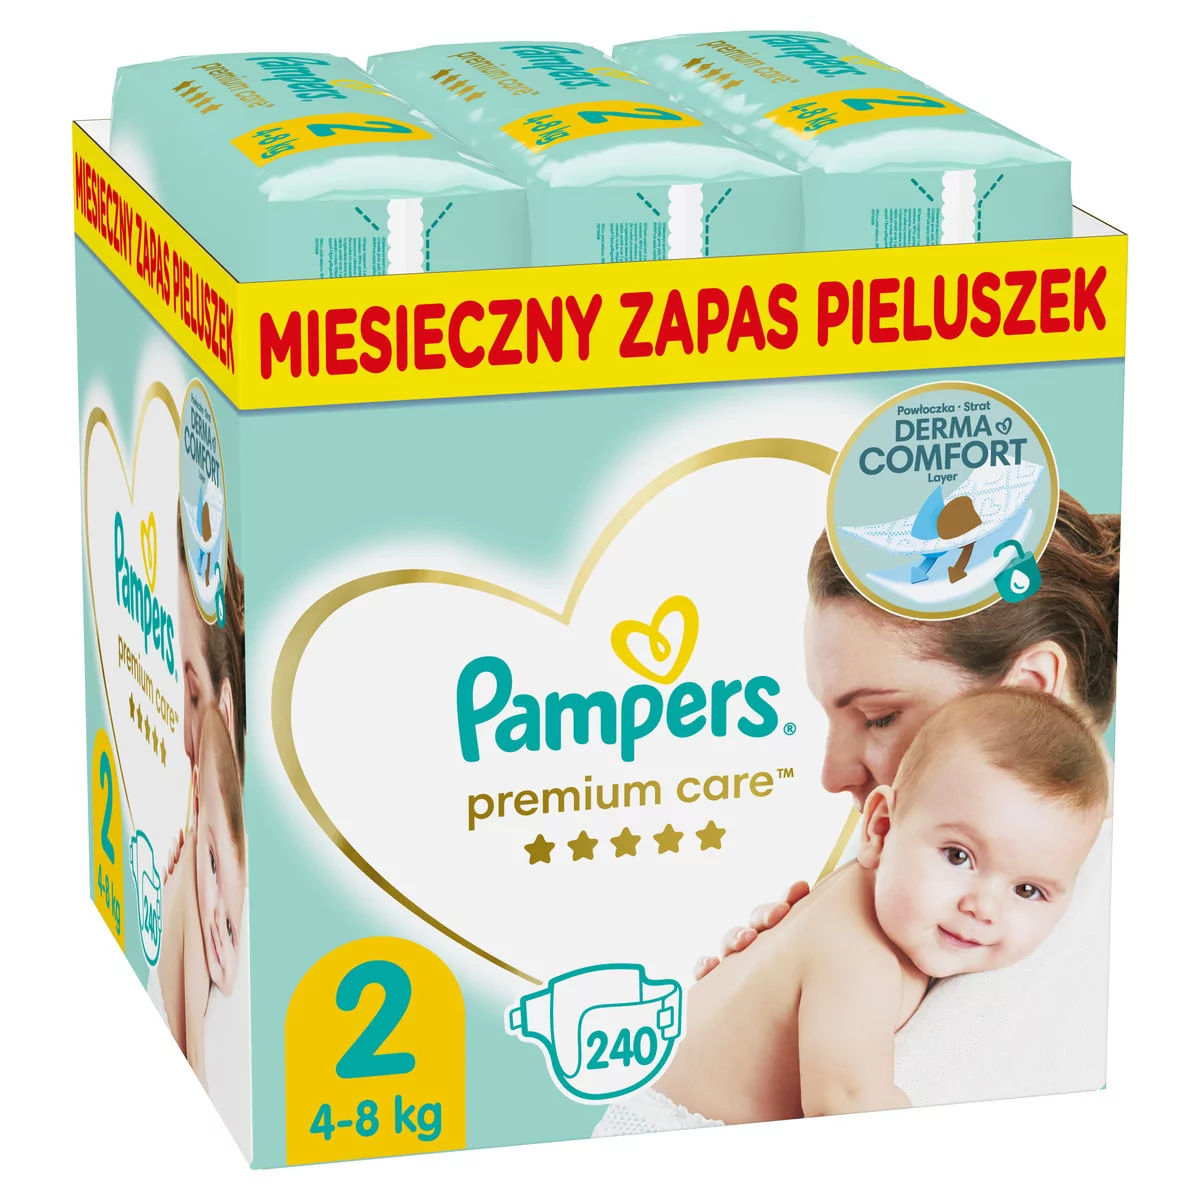 tesco pampersy pampers